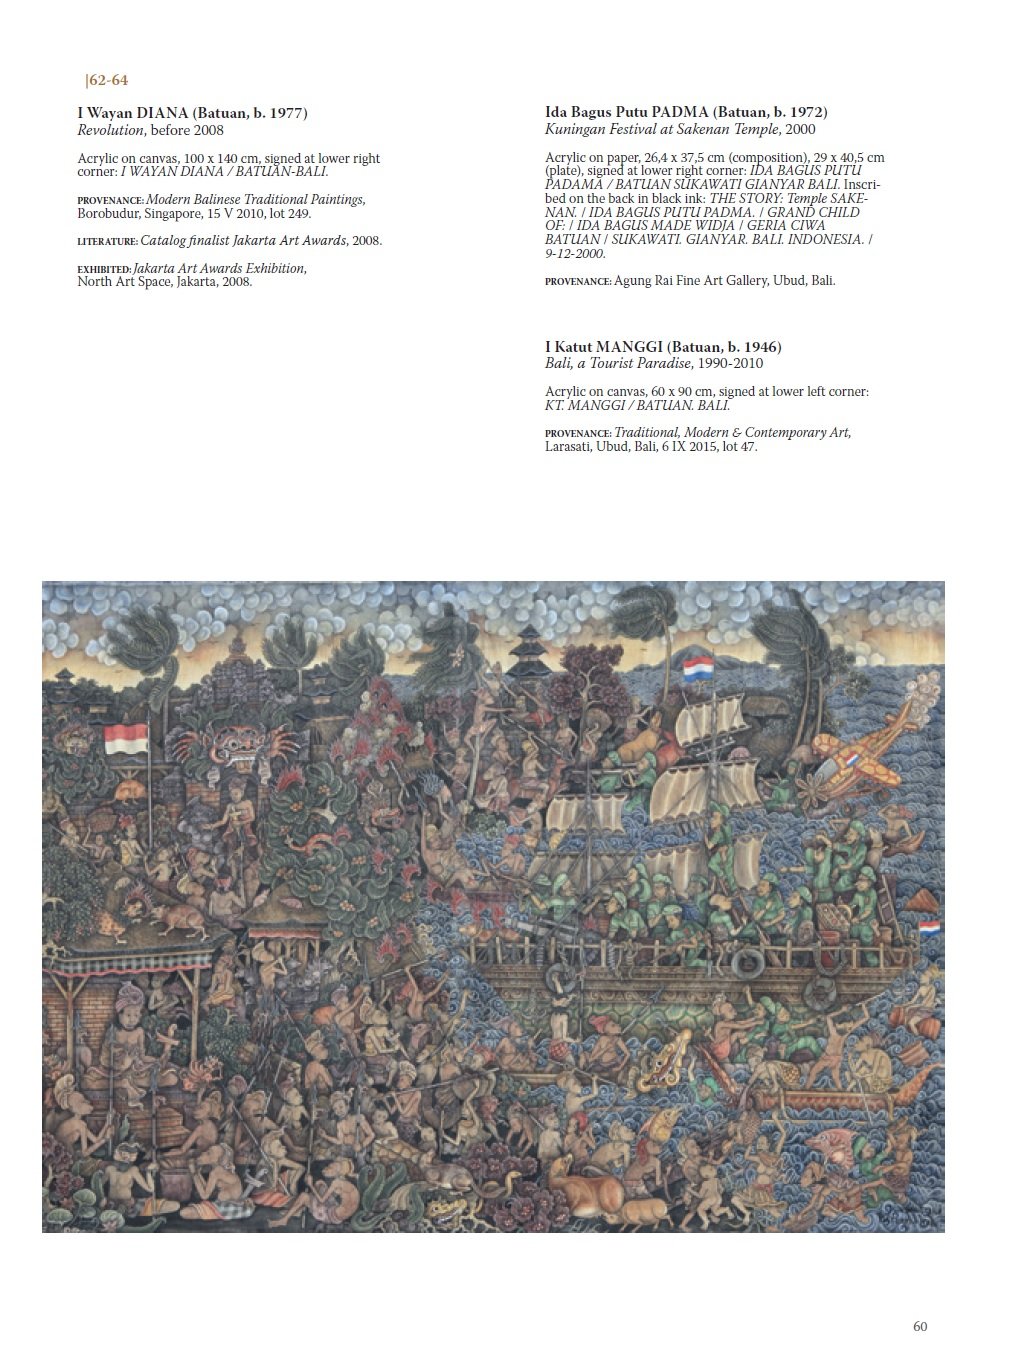 Balinese Painting and Sculpture: From the Krzysztof Musial Collection